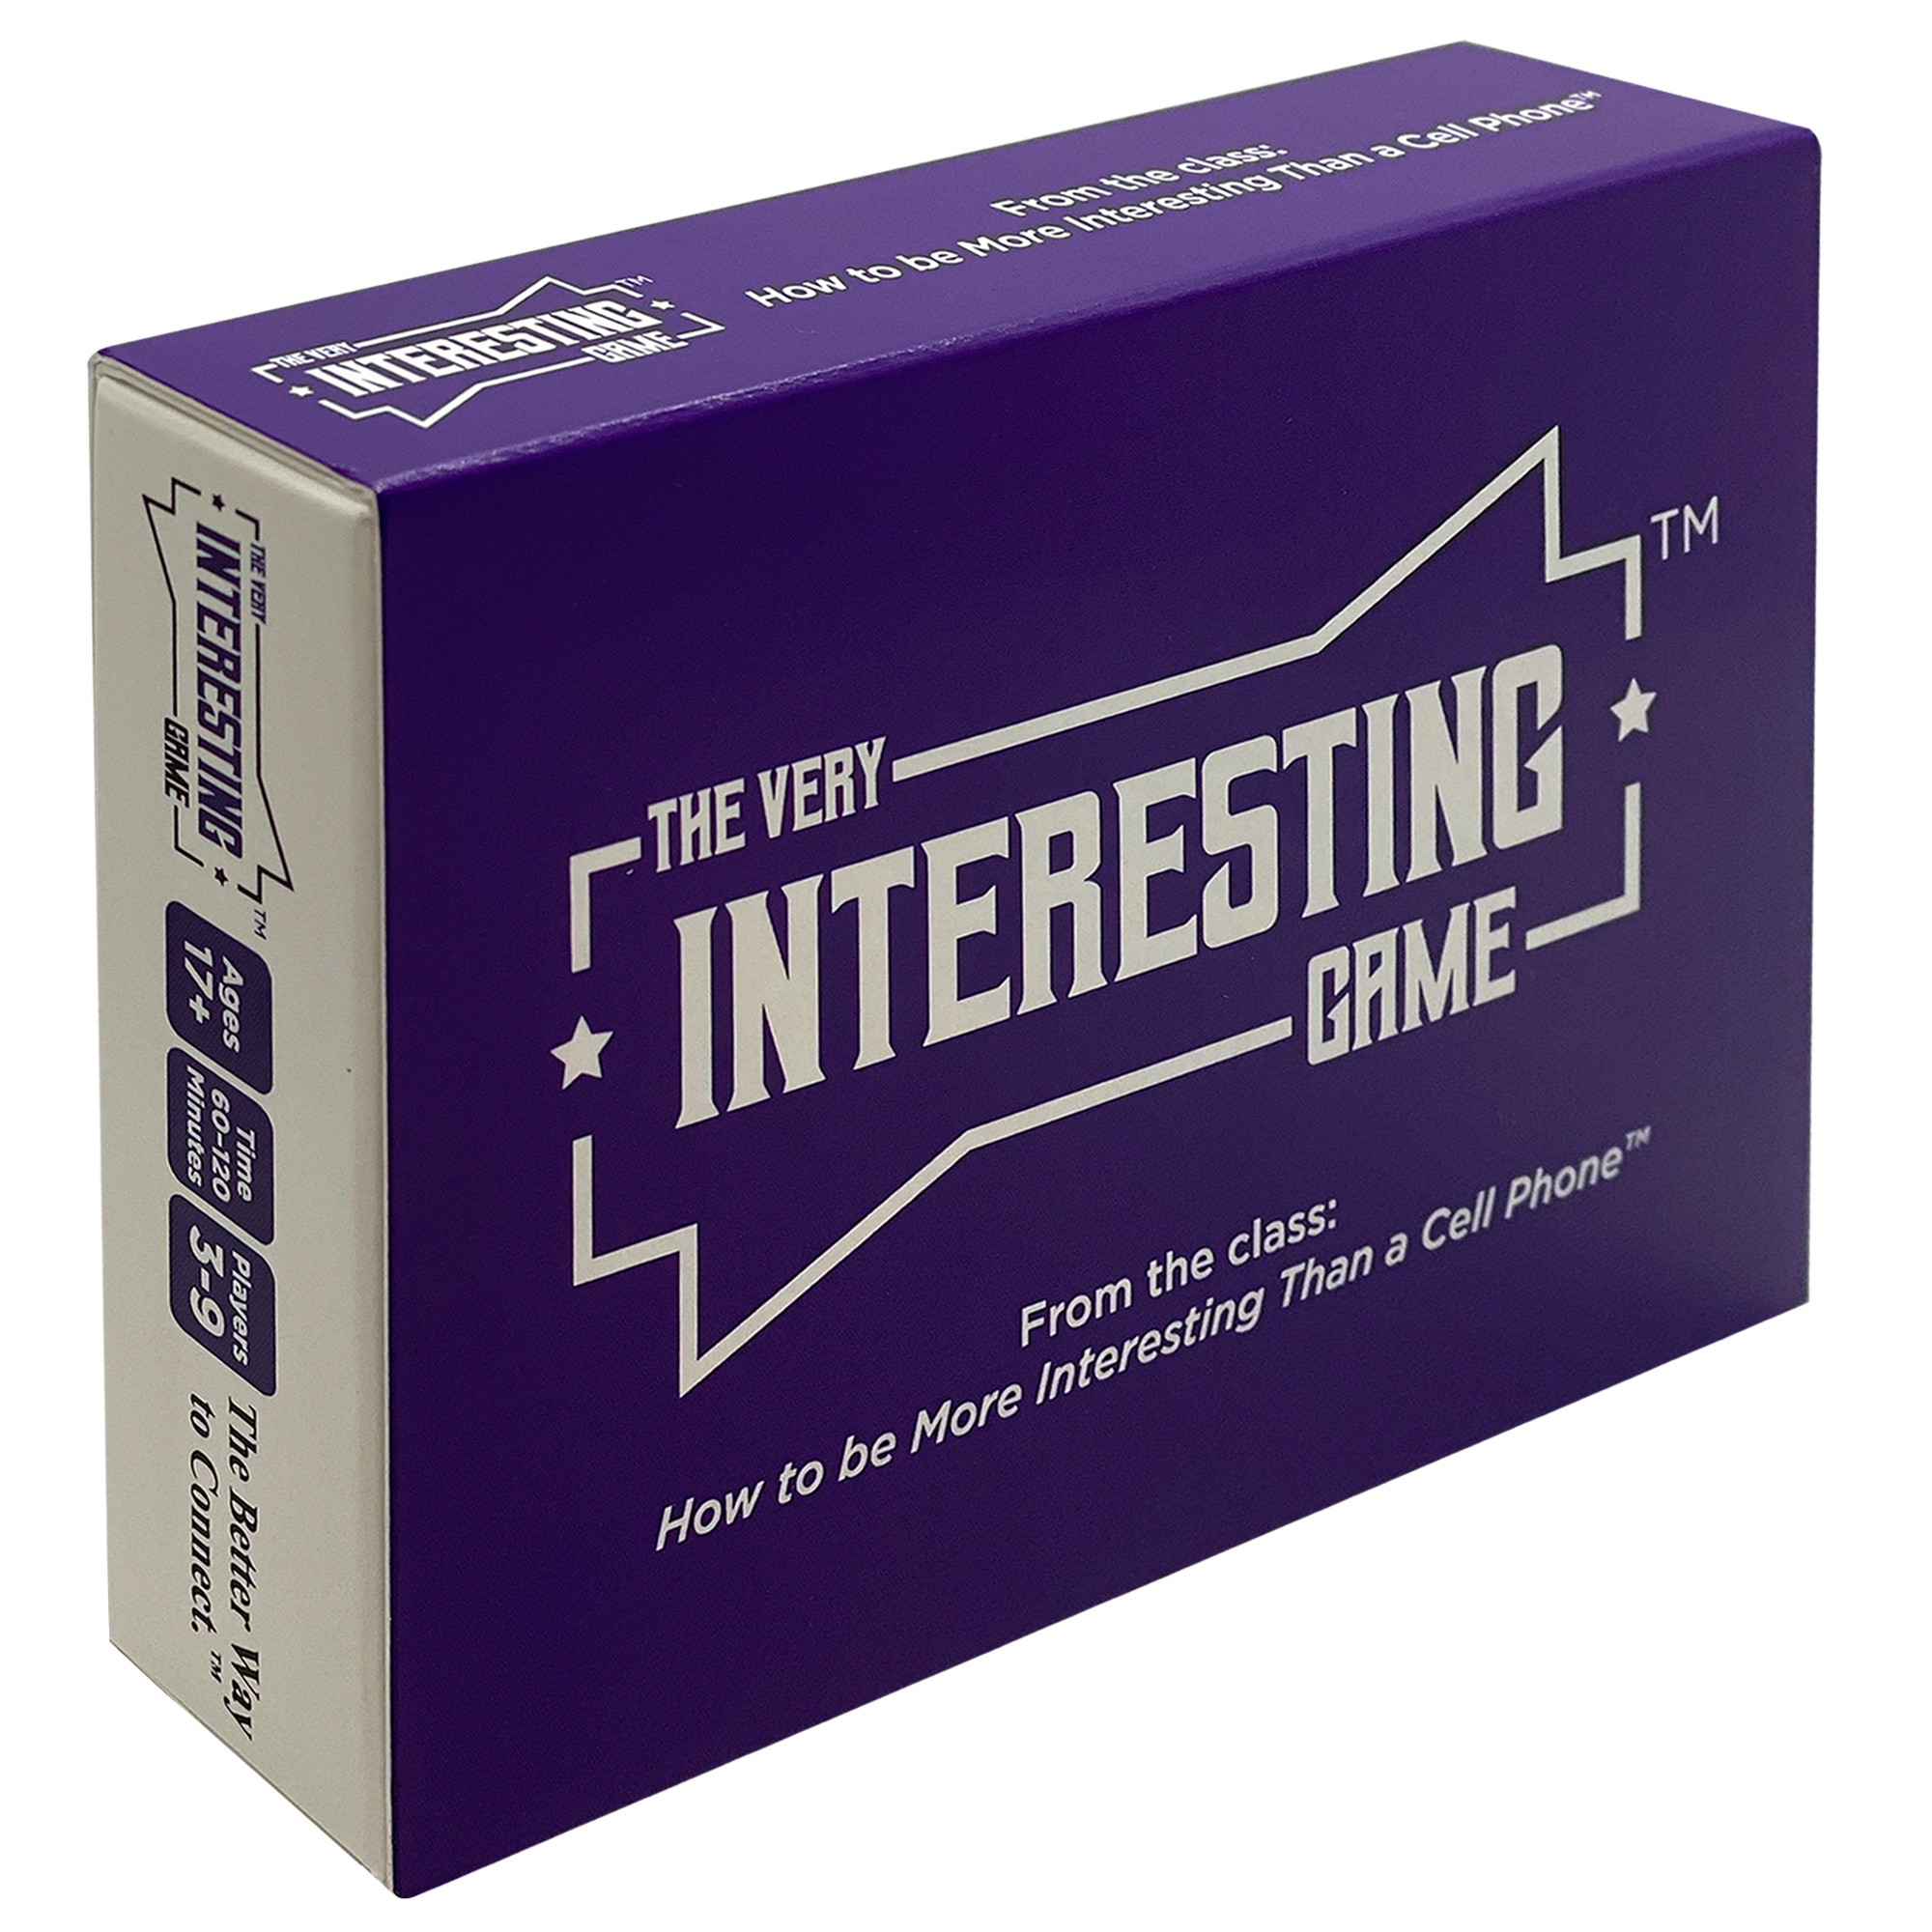 The Very Interesting Game® invented by Deedre Daniel